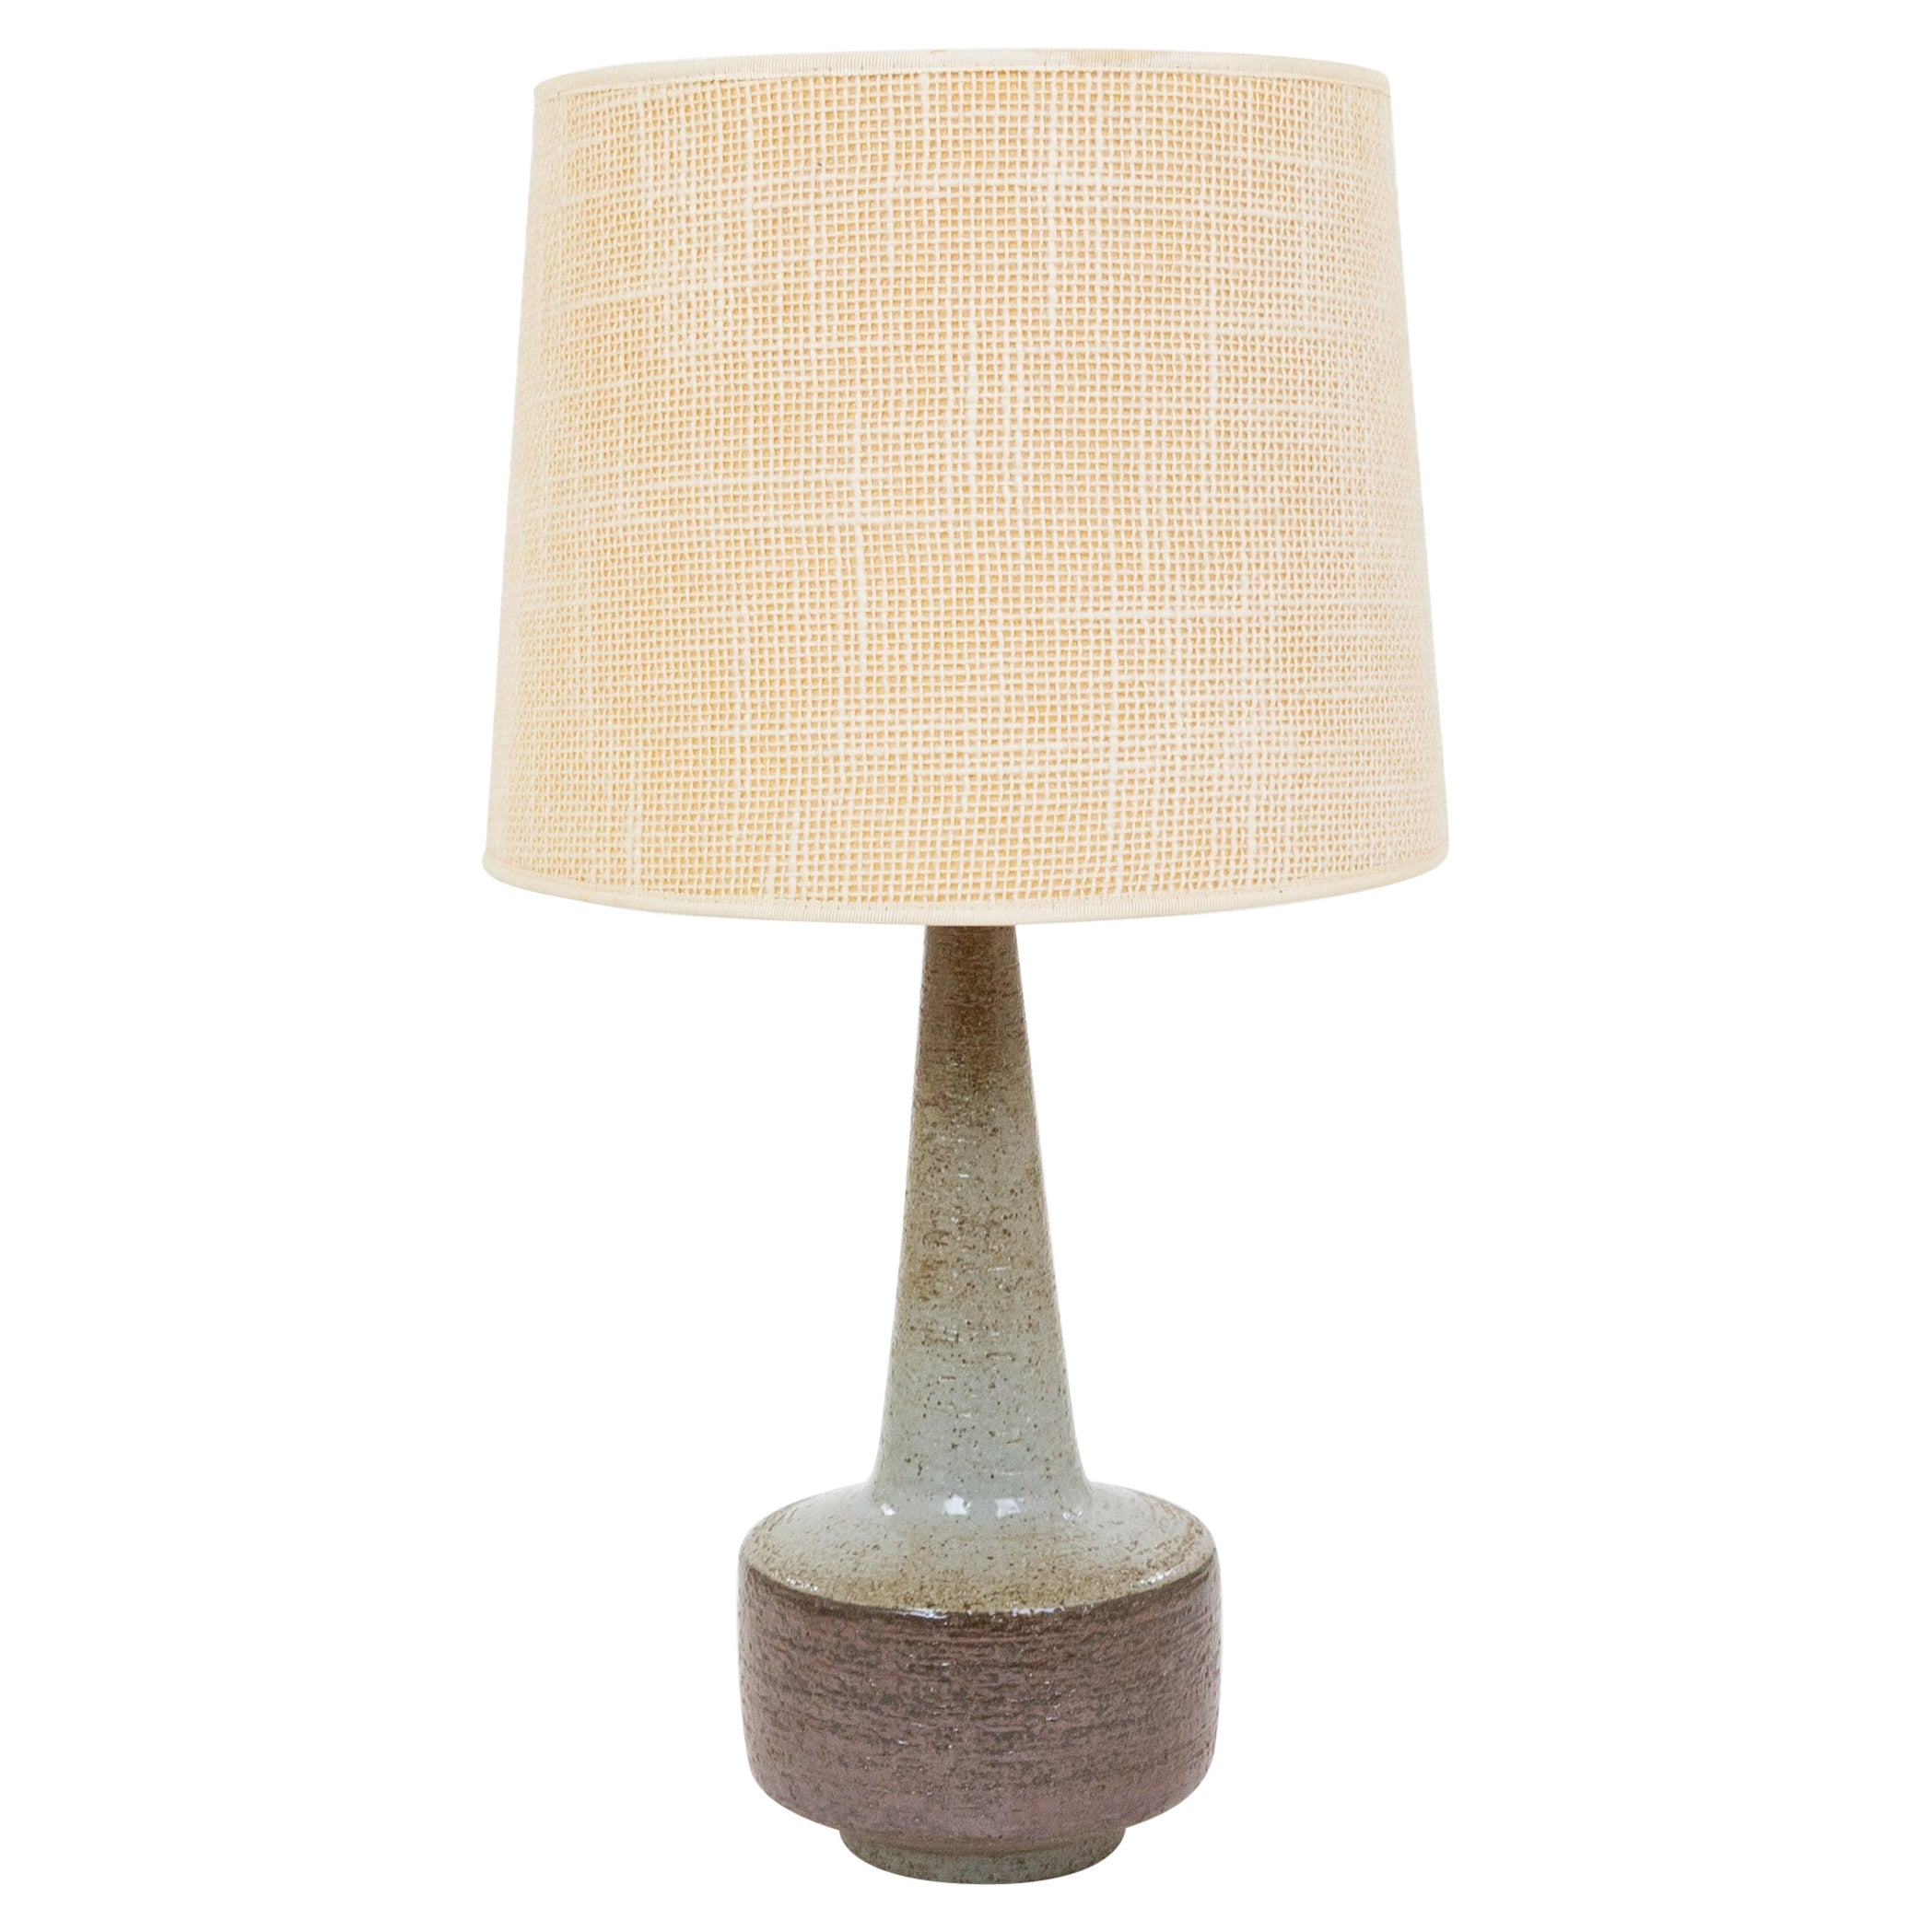 Brown and Grey DL/46 table lamp by Linnemann-Schmidt for Palshus, 1960s For Sale